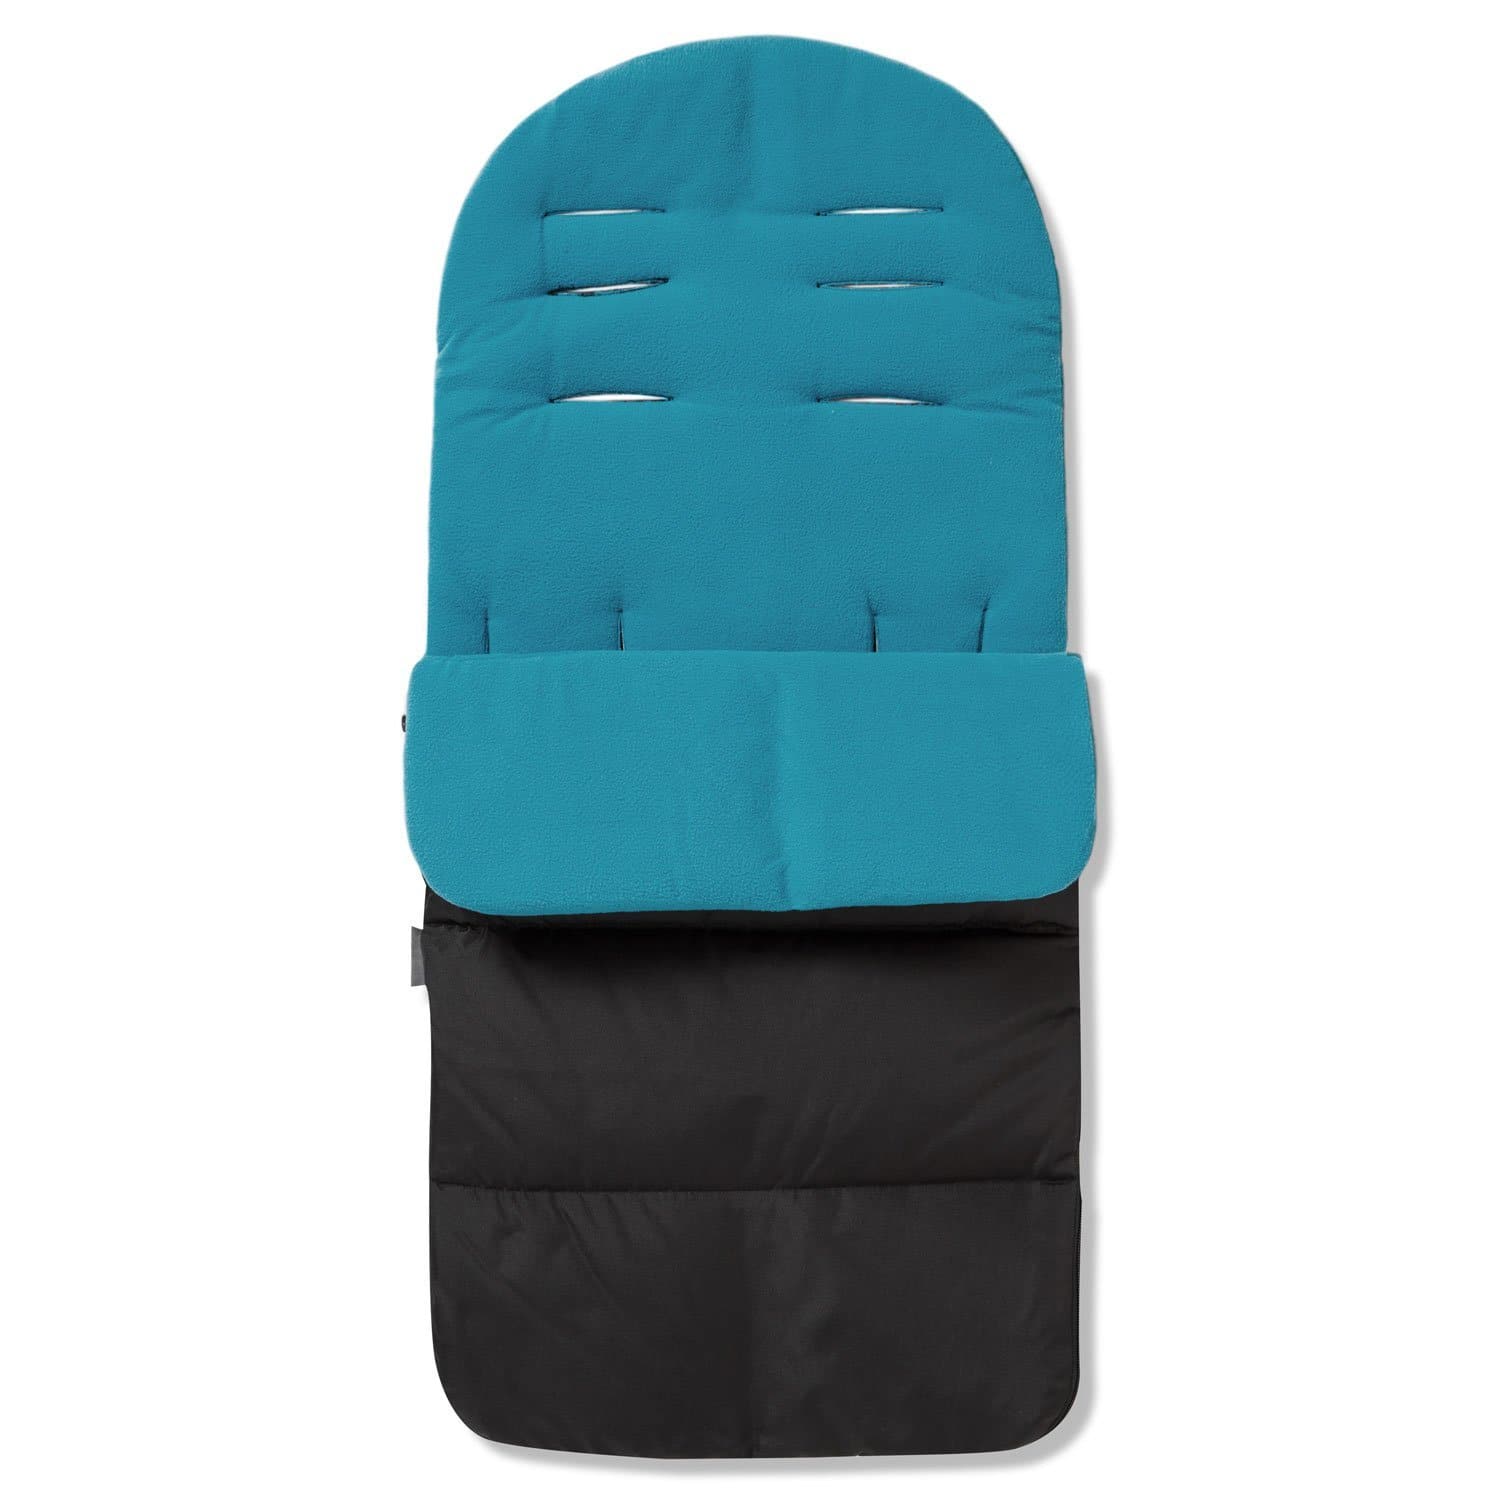 Premium Footmuff / Cosy Toes Compatible with Little Shield - Ocean Blue / Fits All Models | For Your Little One